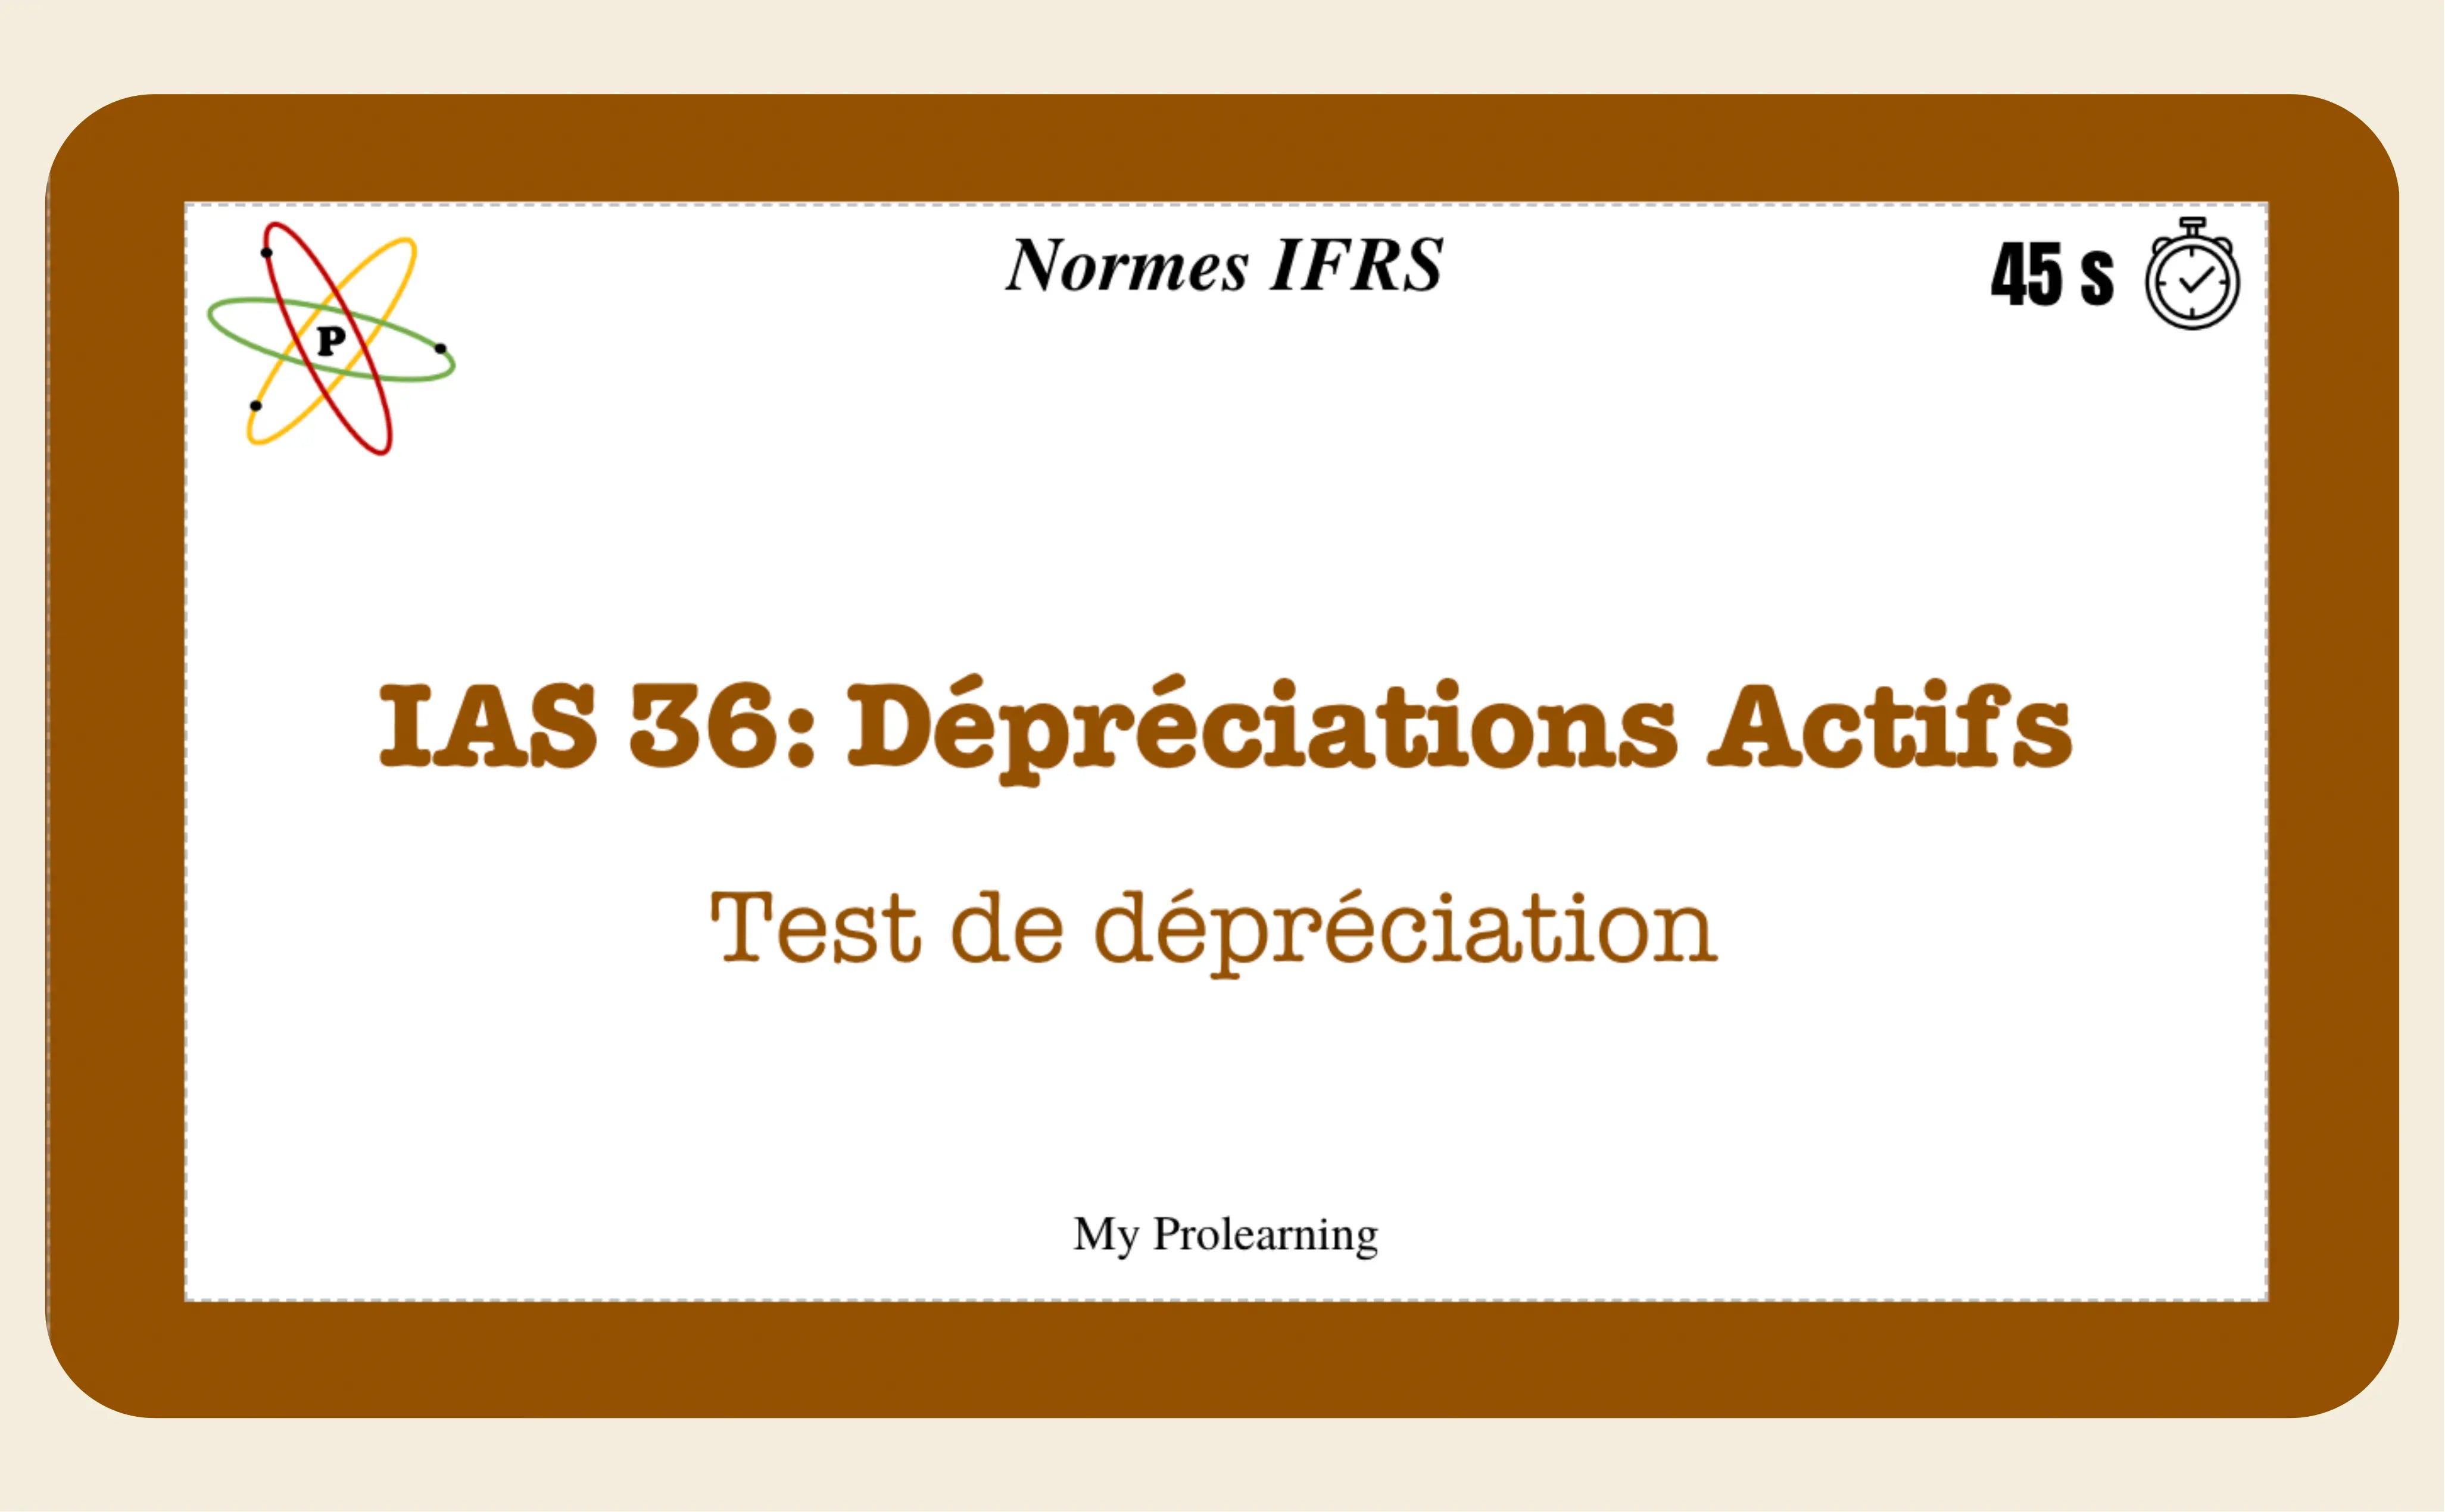 FICHES NORMES IFRS - My Prolearning 